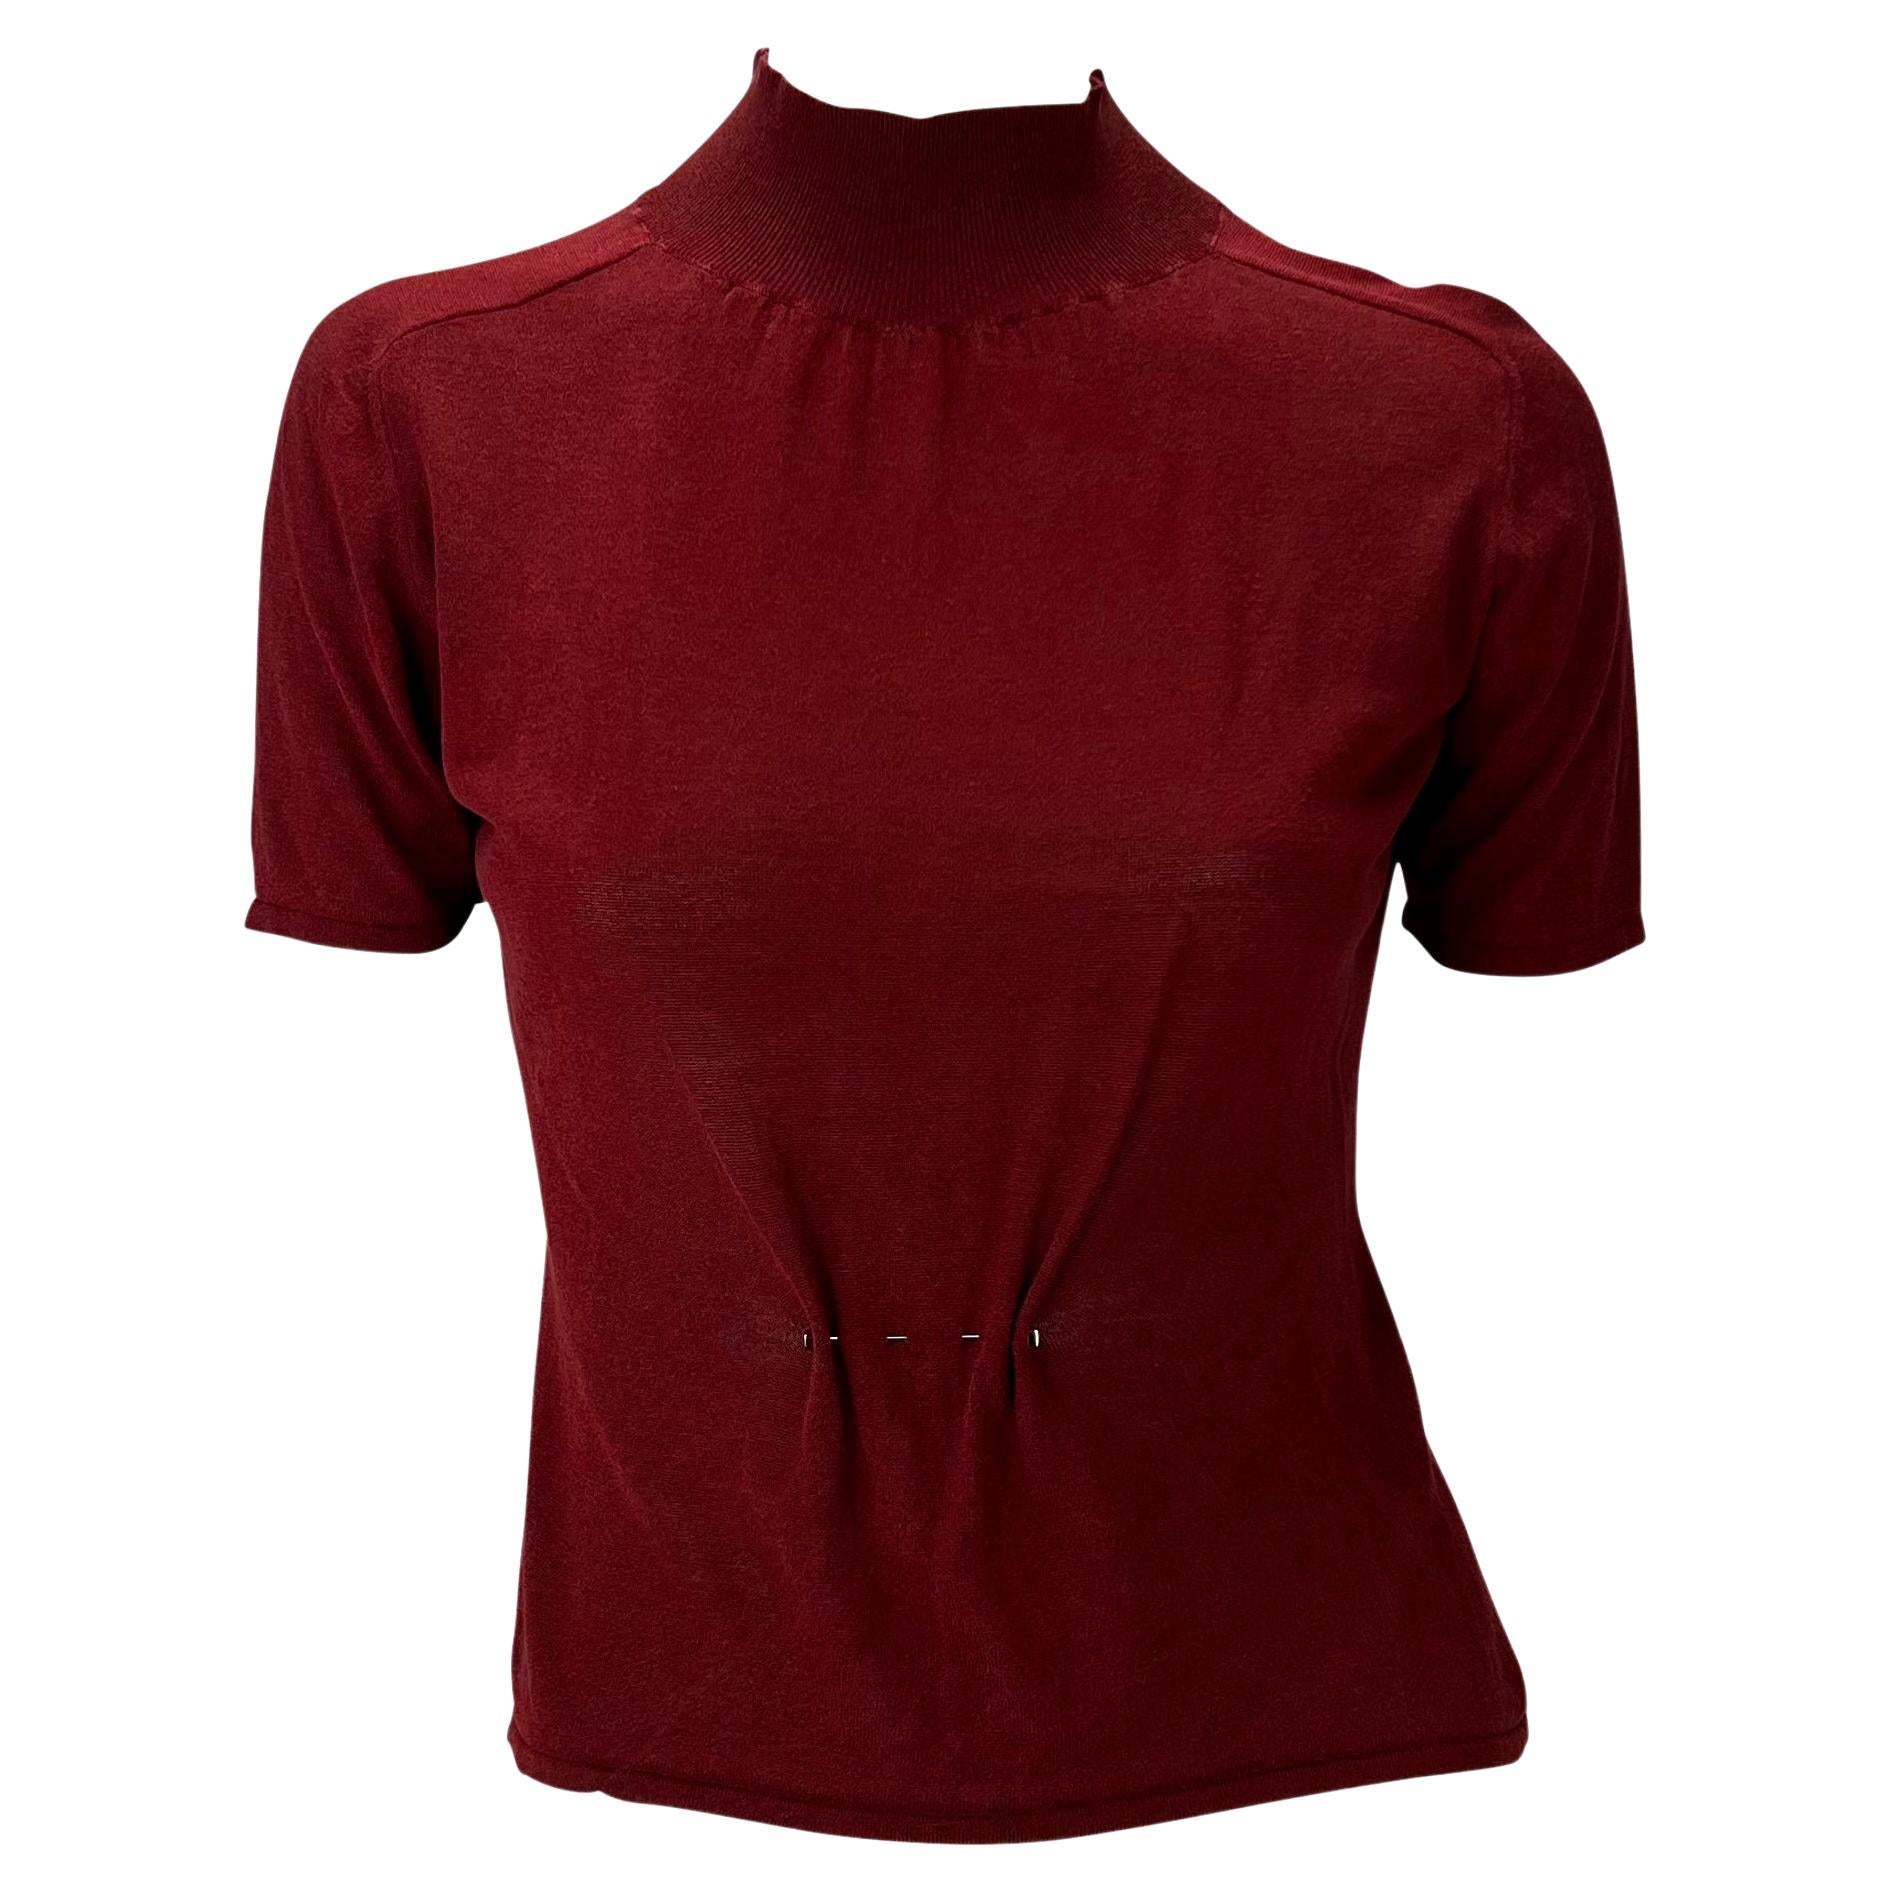 F/W 1999 Gucci by Tom Ford Runway G Pin Sheer Mock Neck Top Maroon